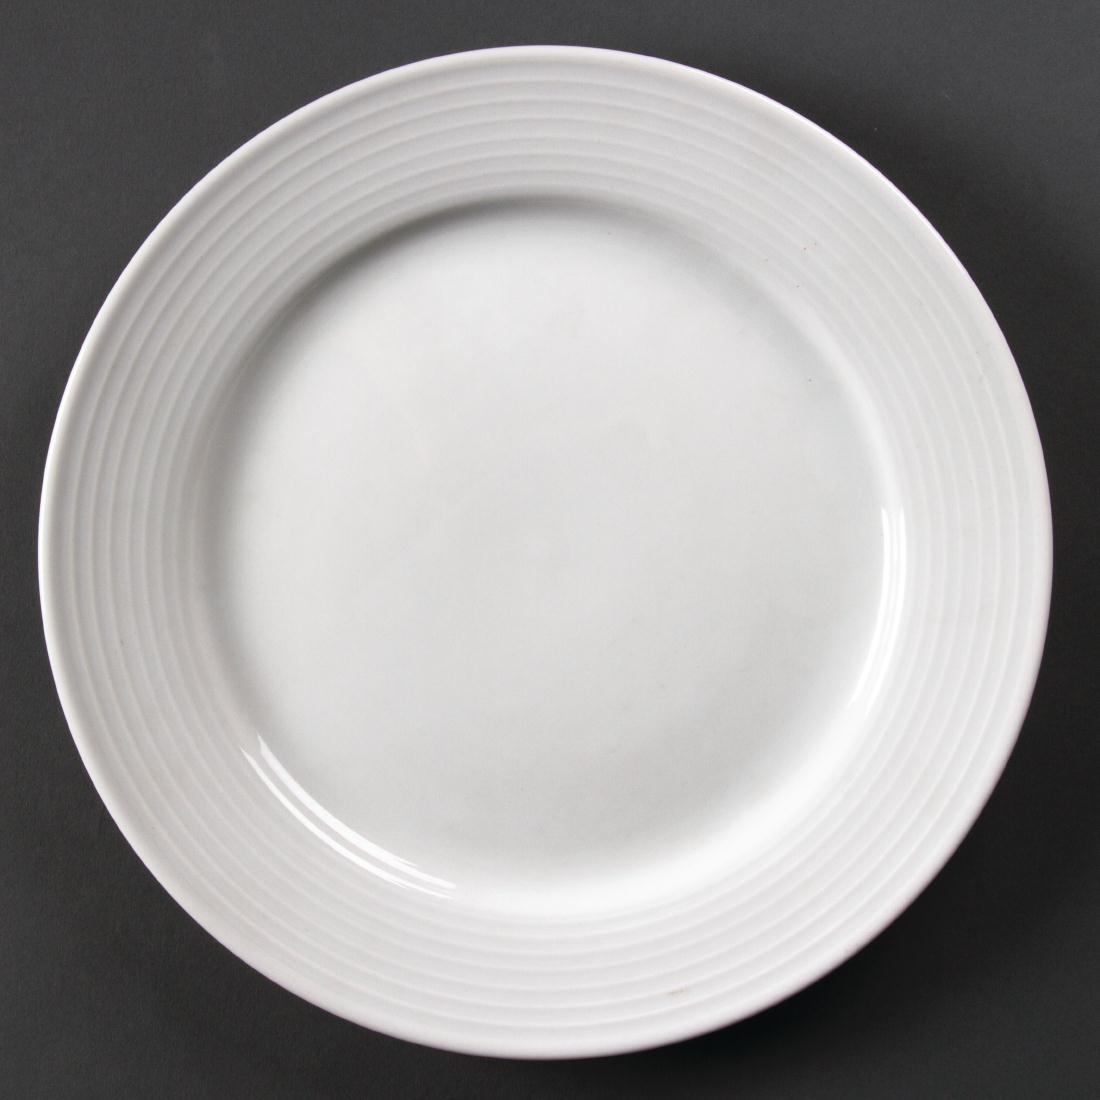 Olympia Linear Wide Rimmed Plates 250mm